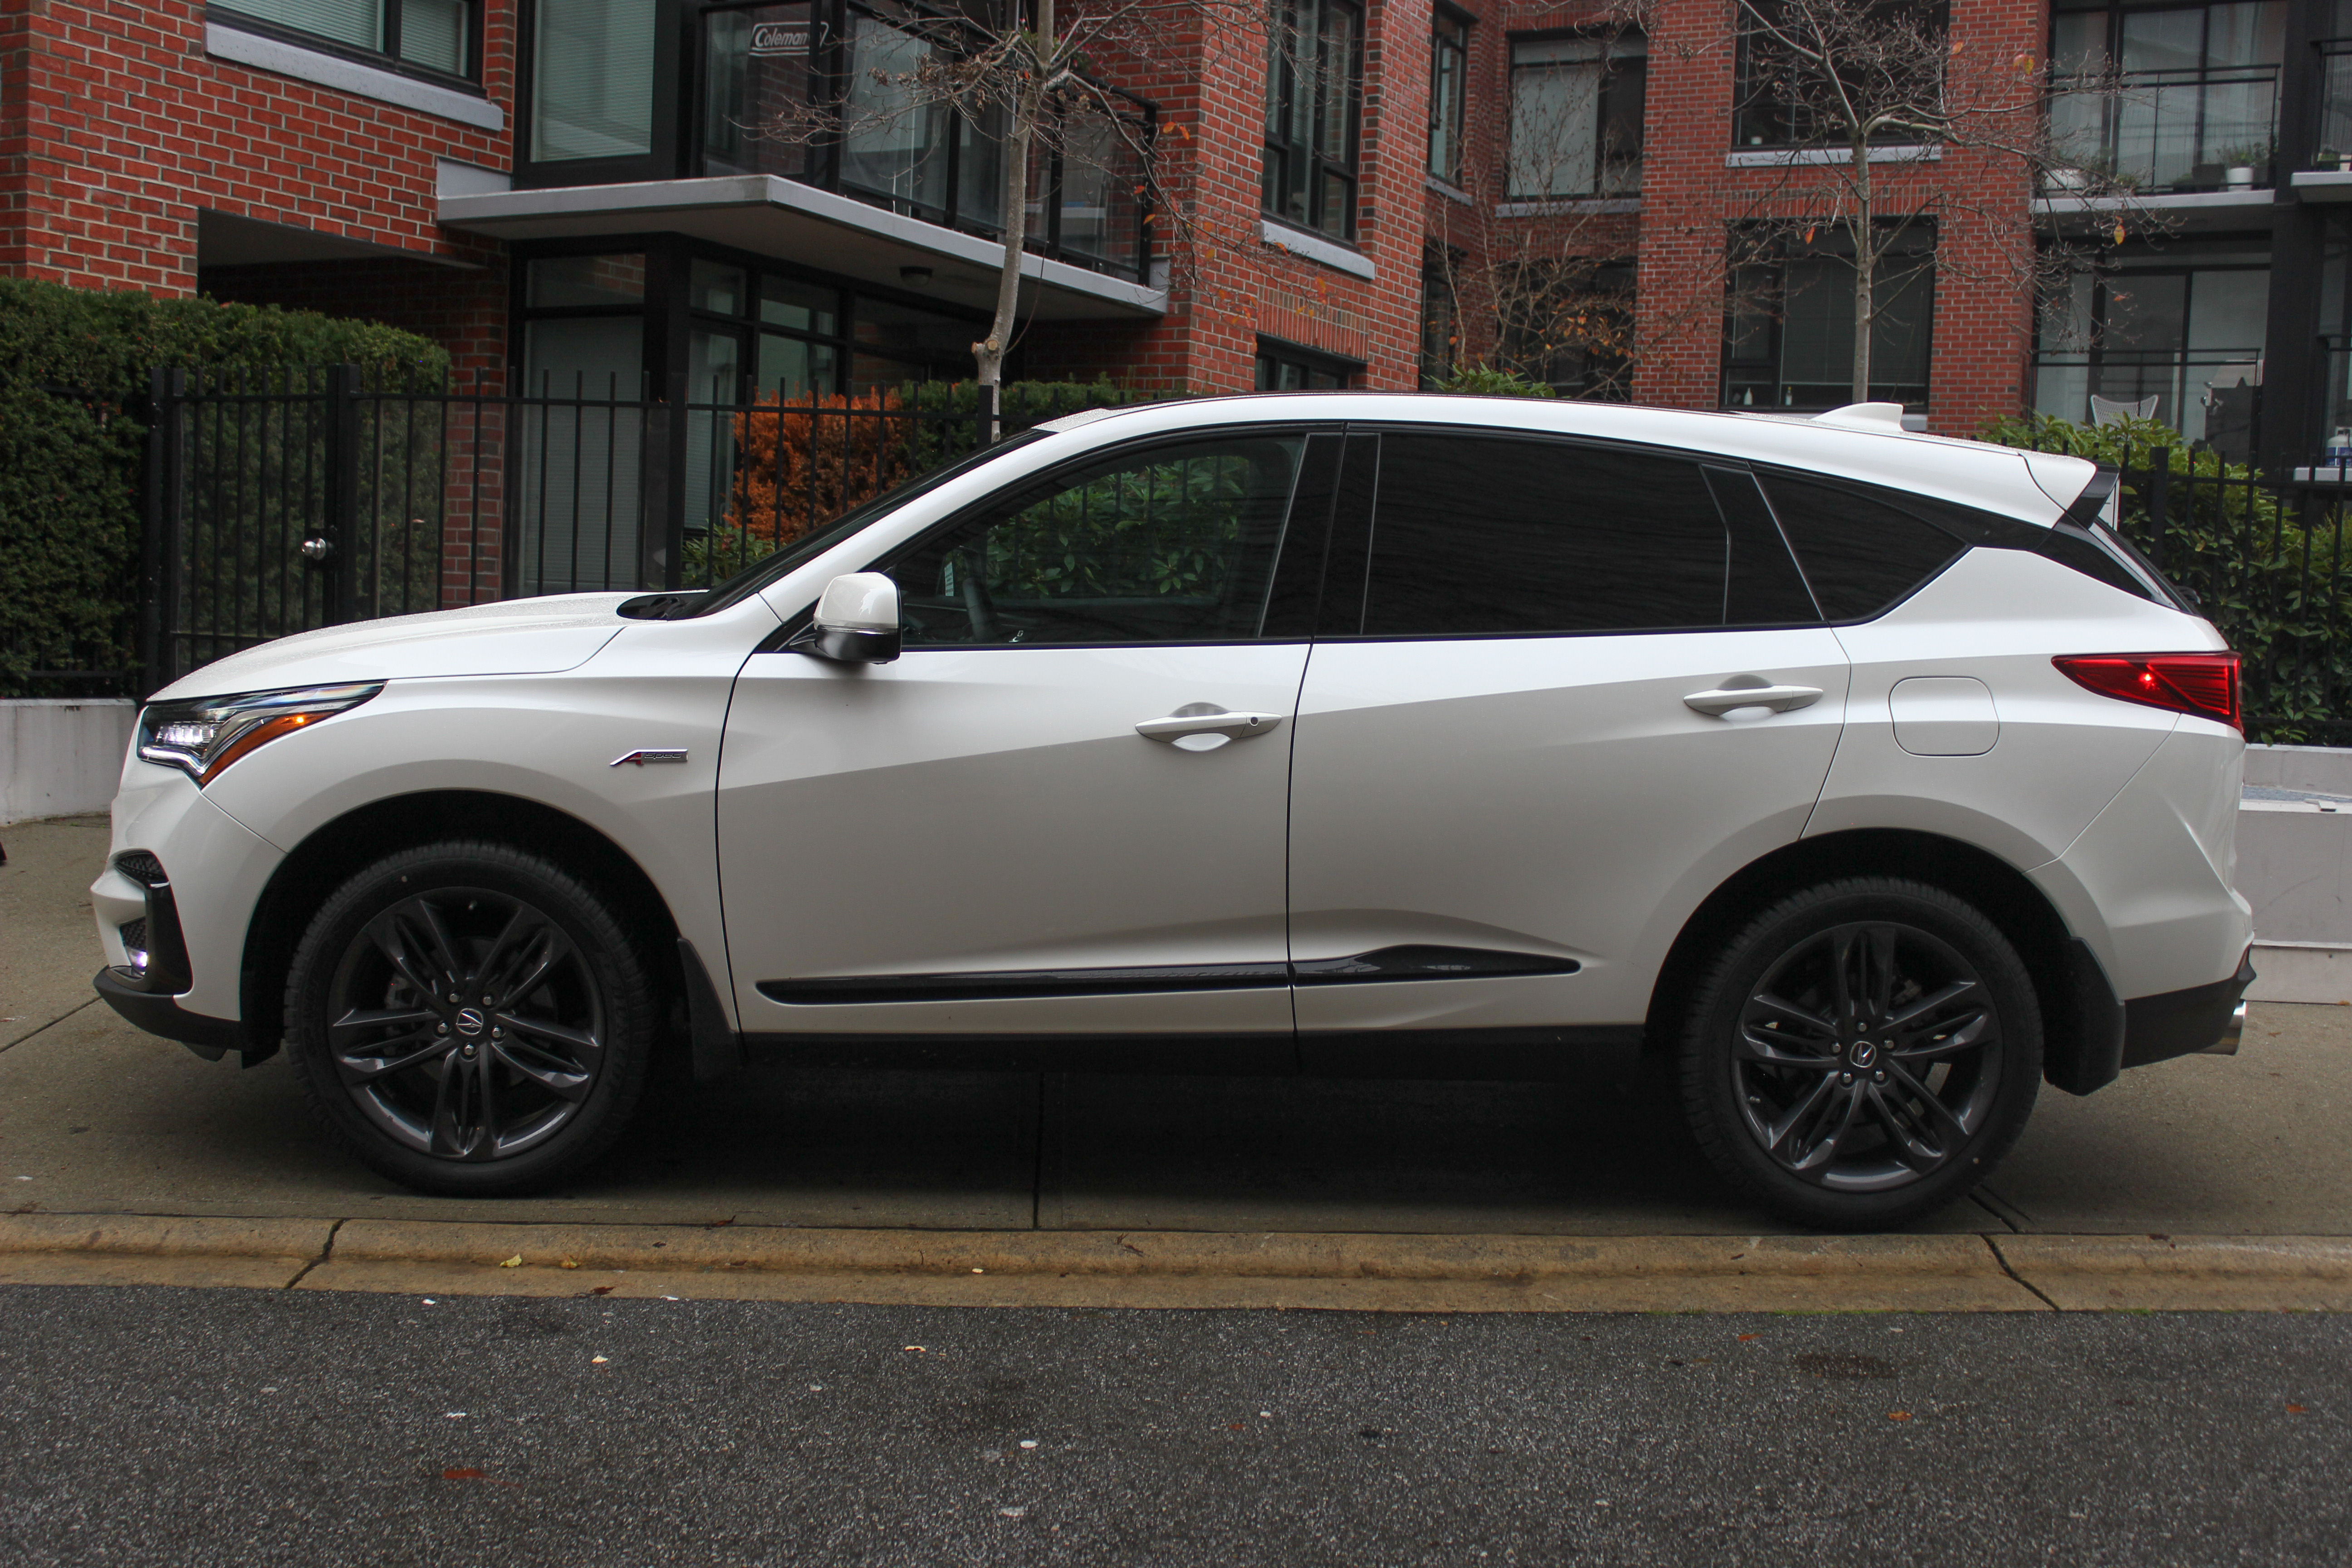 Acura RDX hd specifications